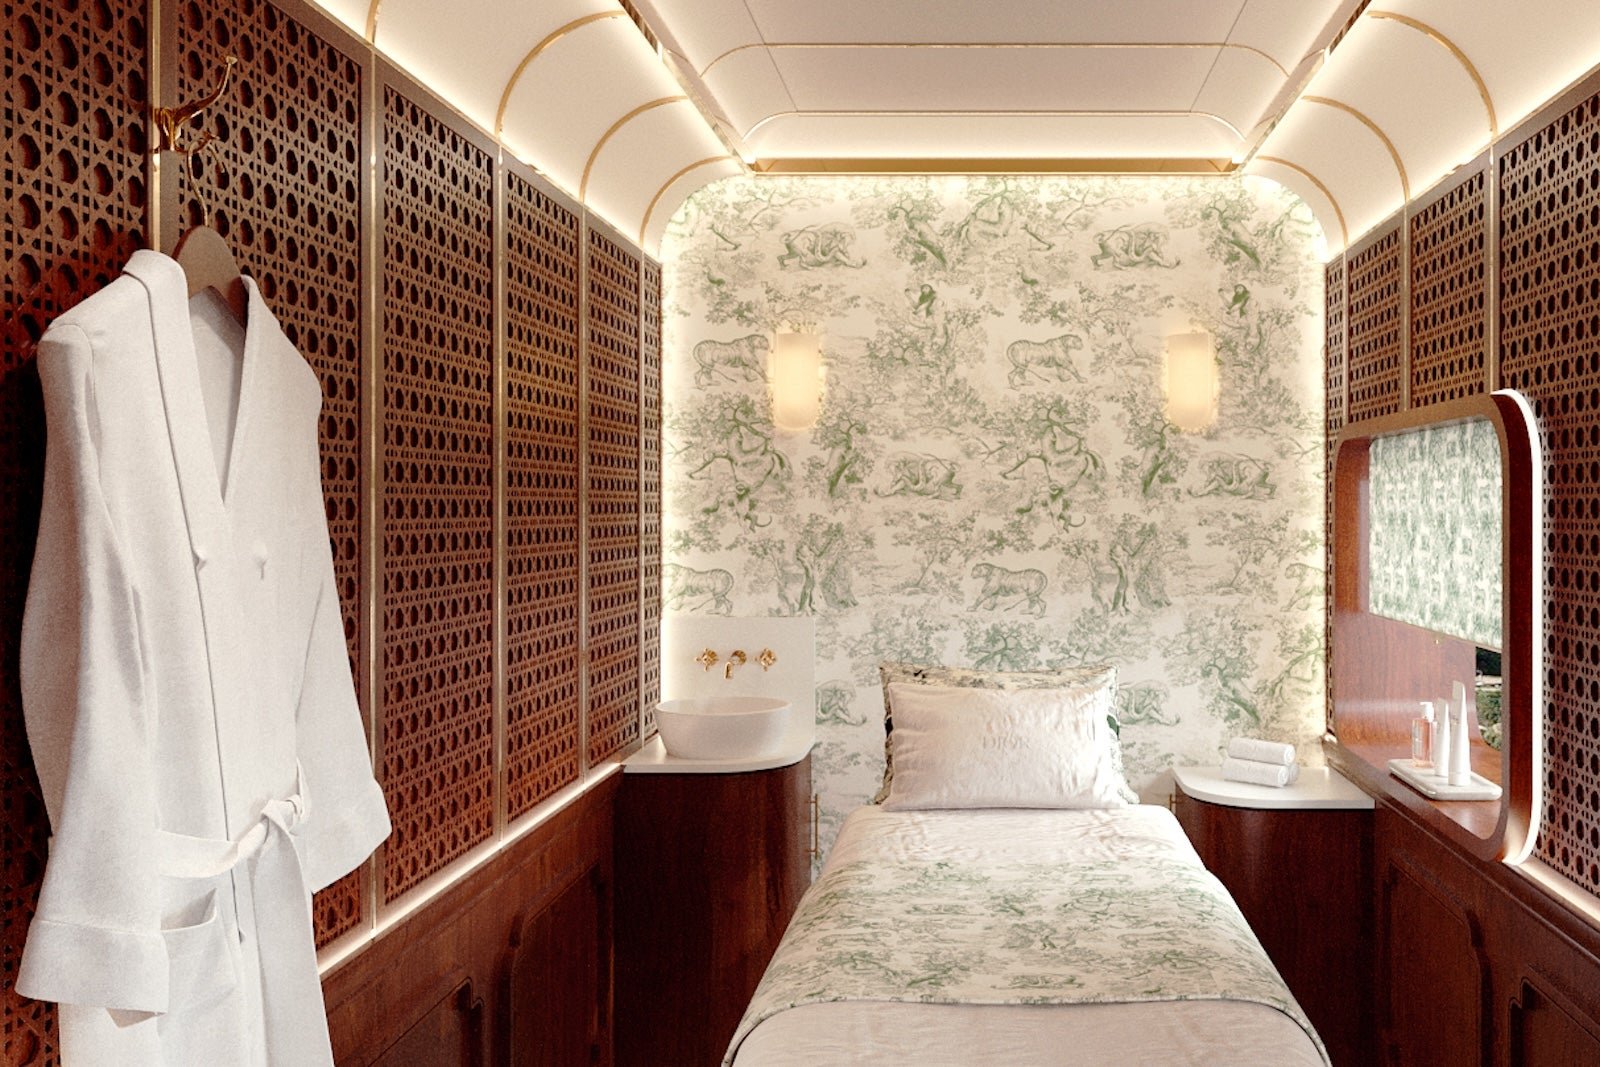 You can now visit a Dior Spa on a luxury train through Southeast Asia